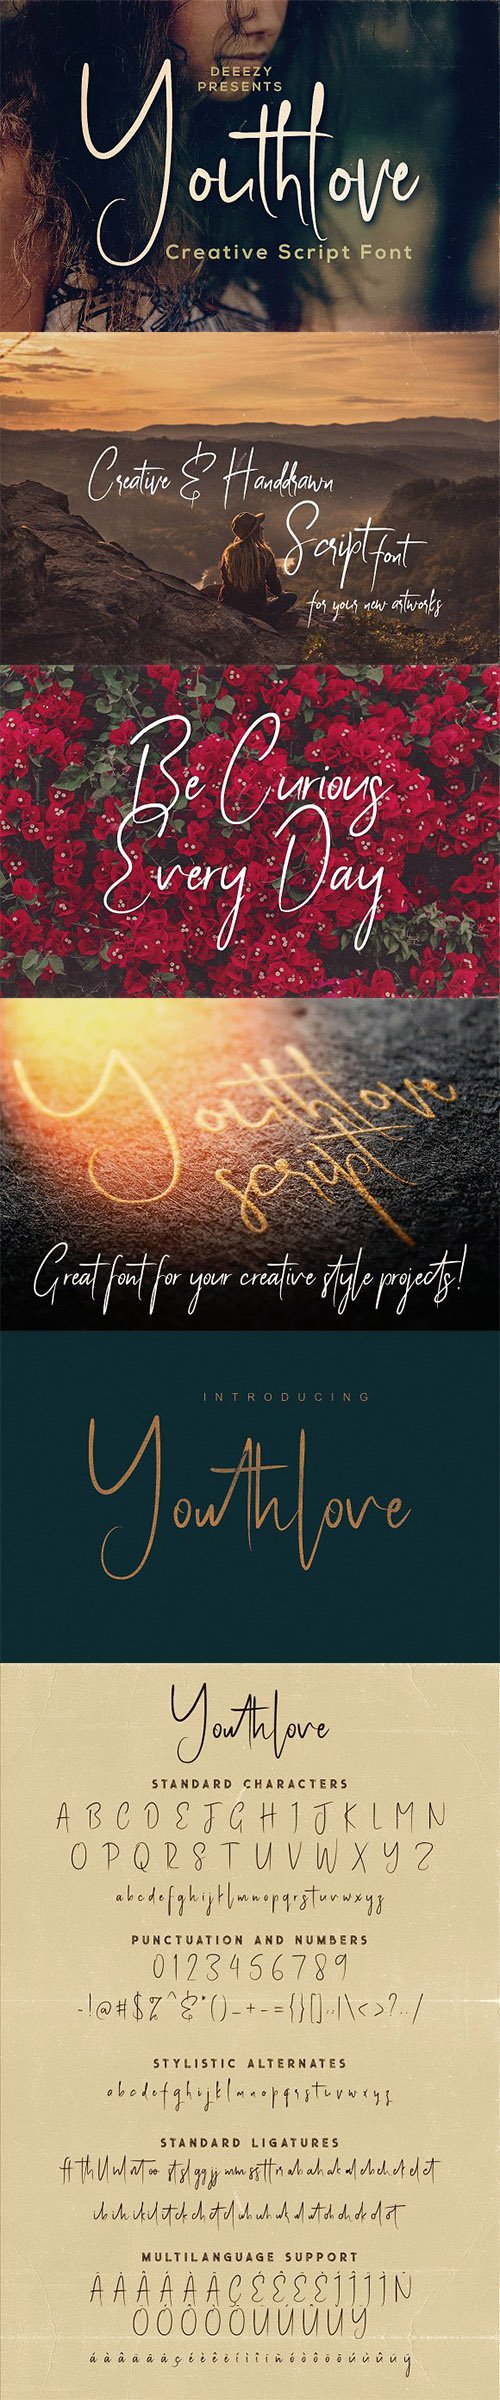 Youthlove Script Font 2873777